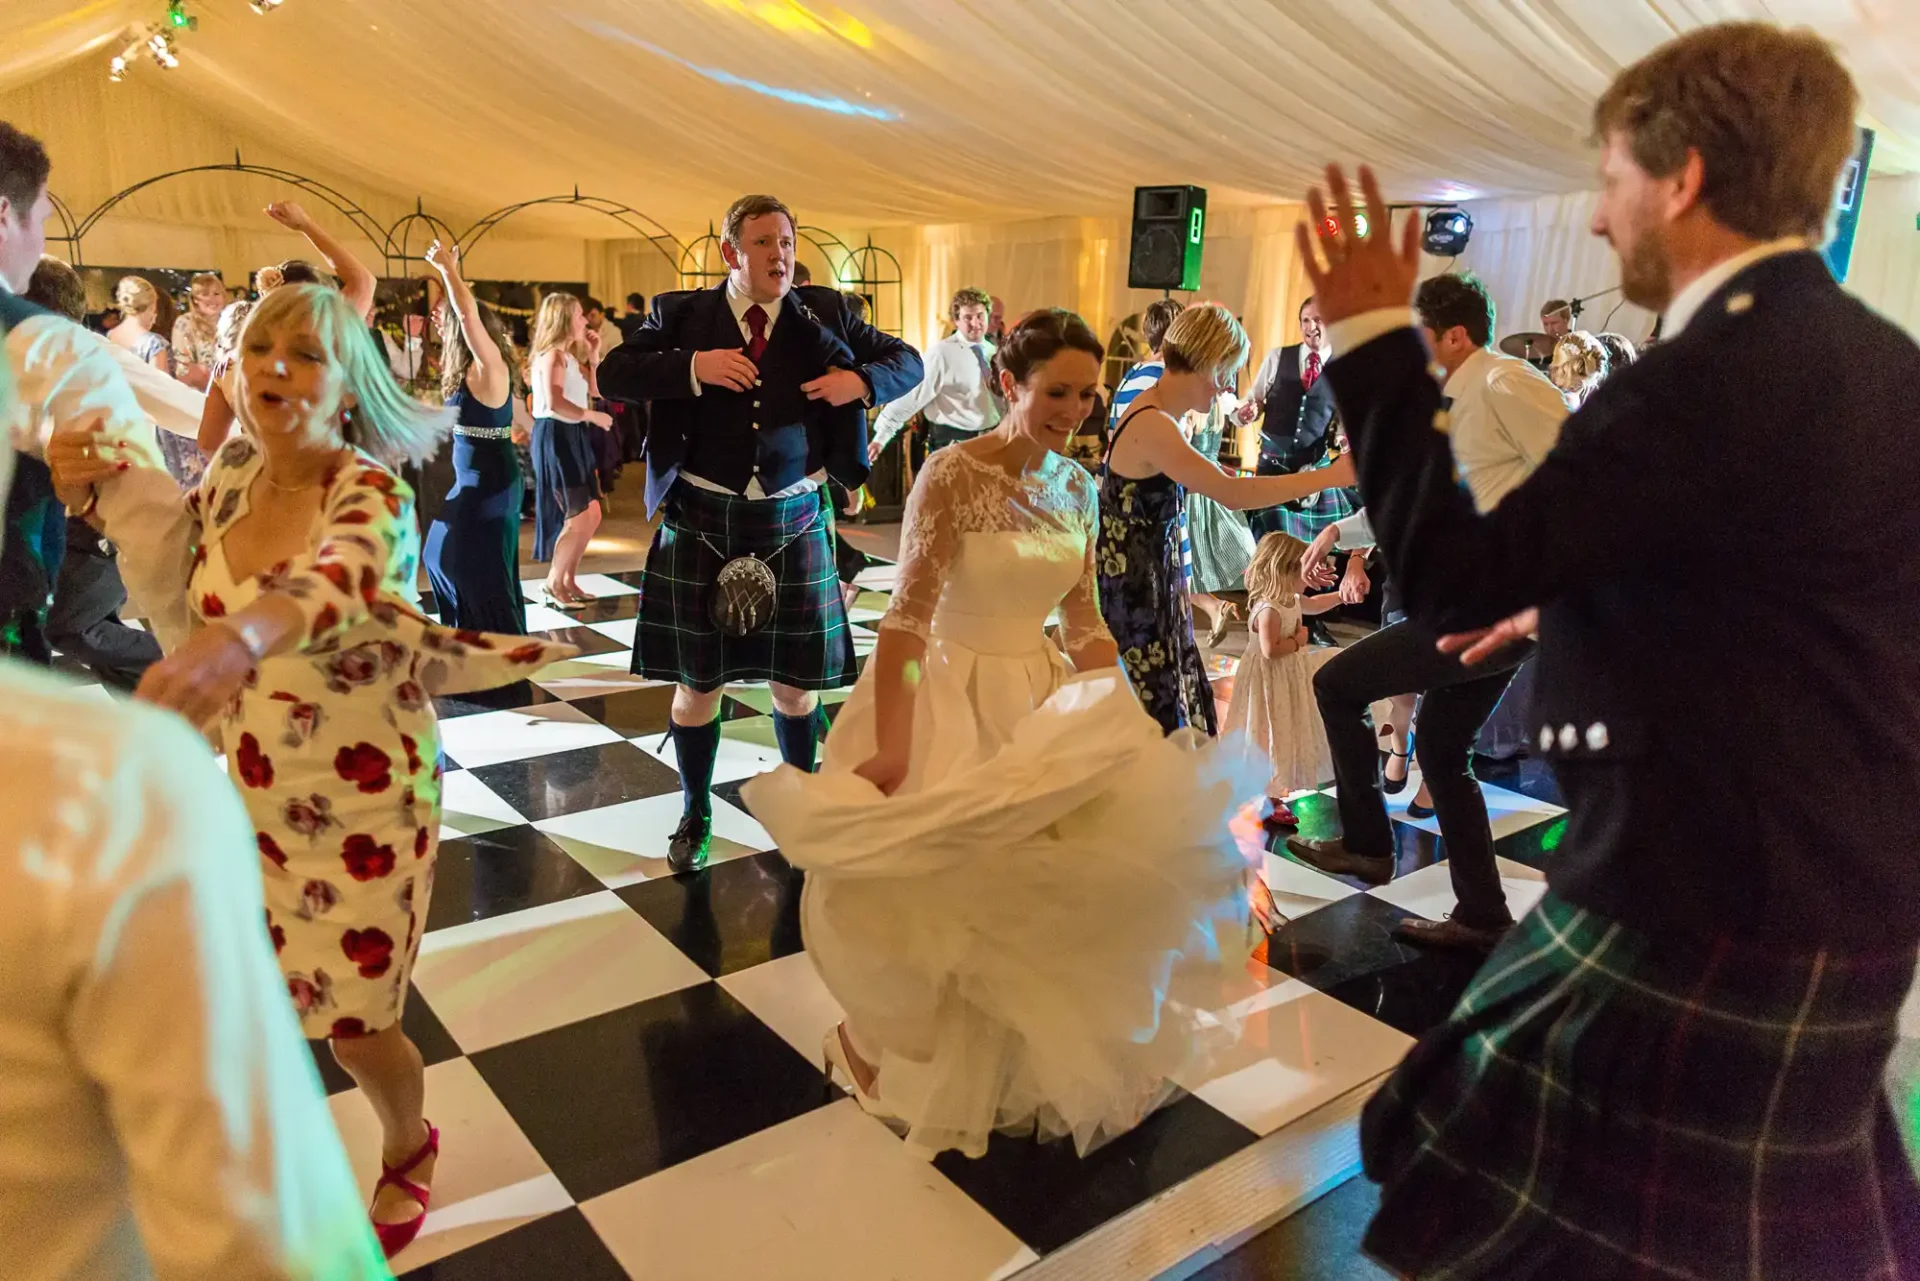 A bride in a white dress dances energetically with guests in kilts and formal attire on a black and white dance floor at a lively wedding reception.